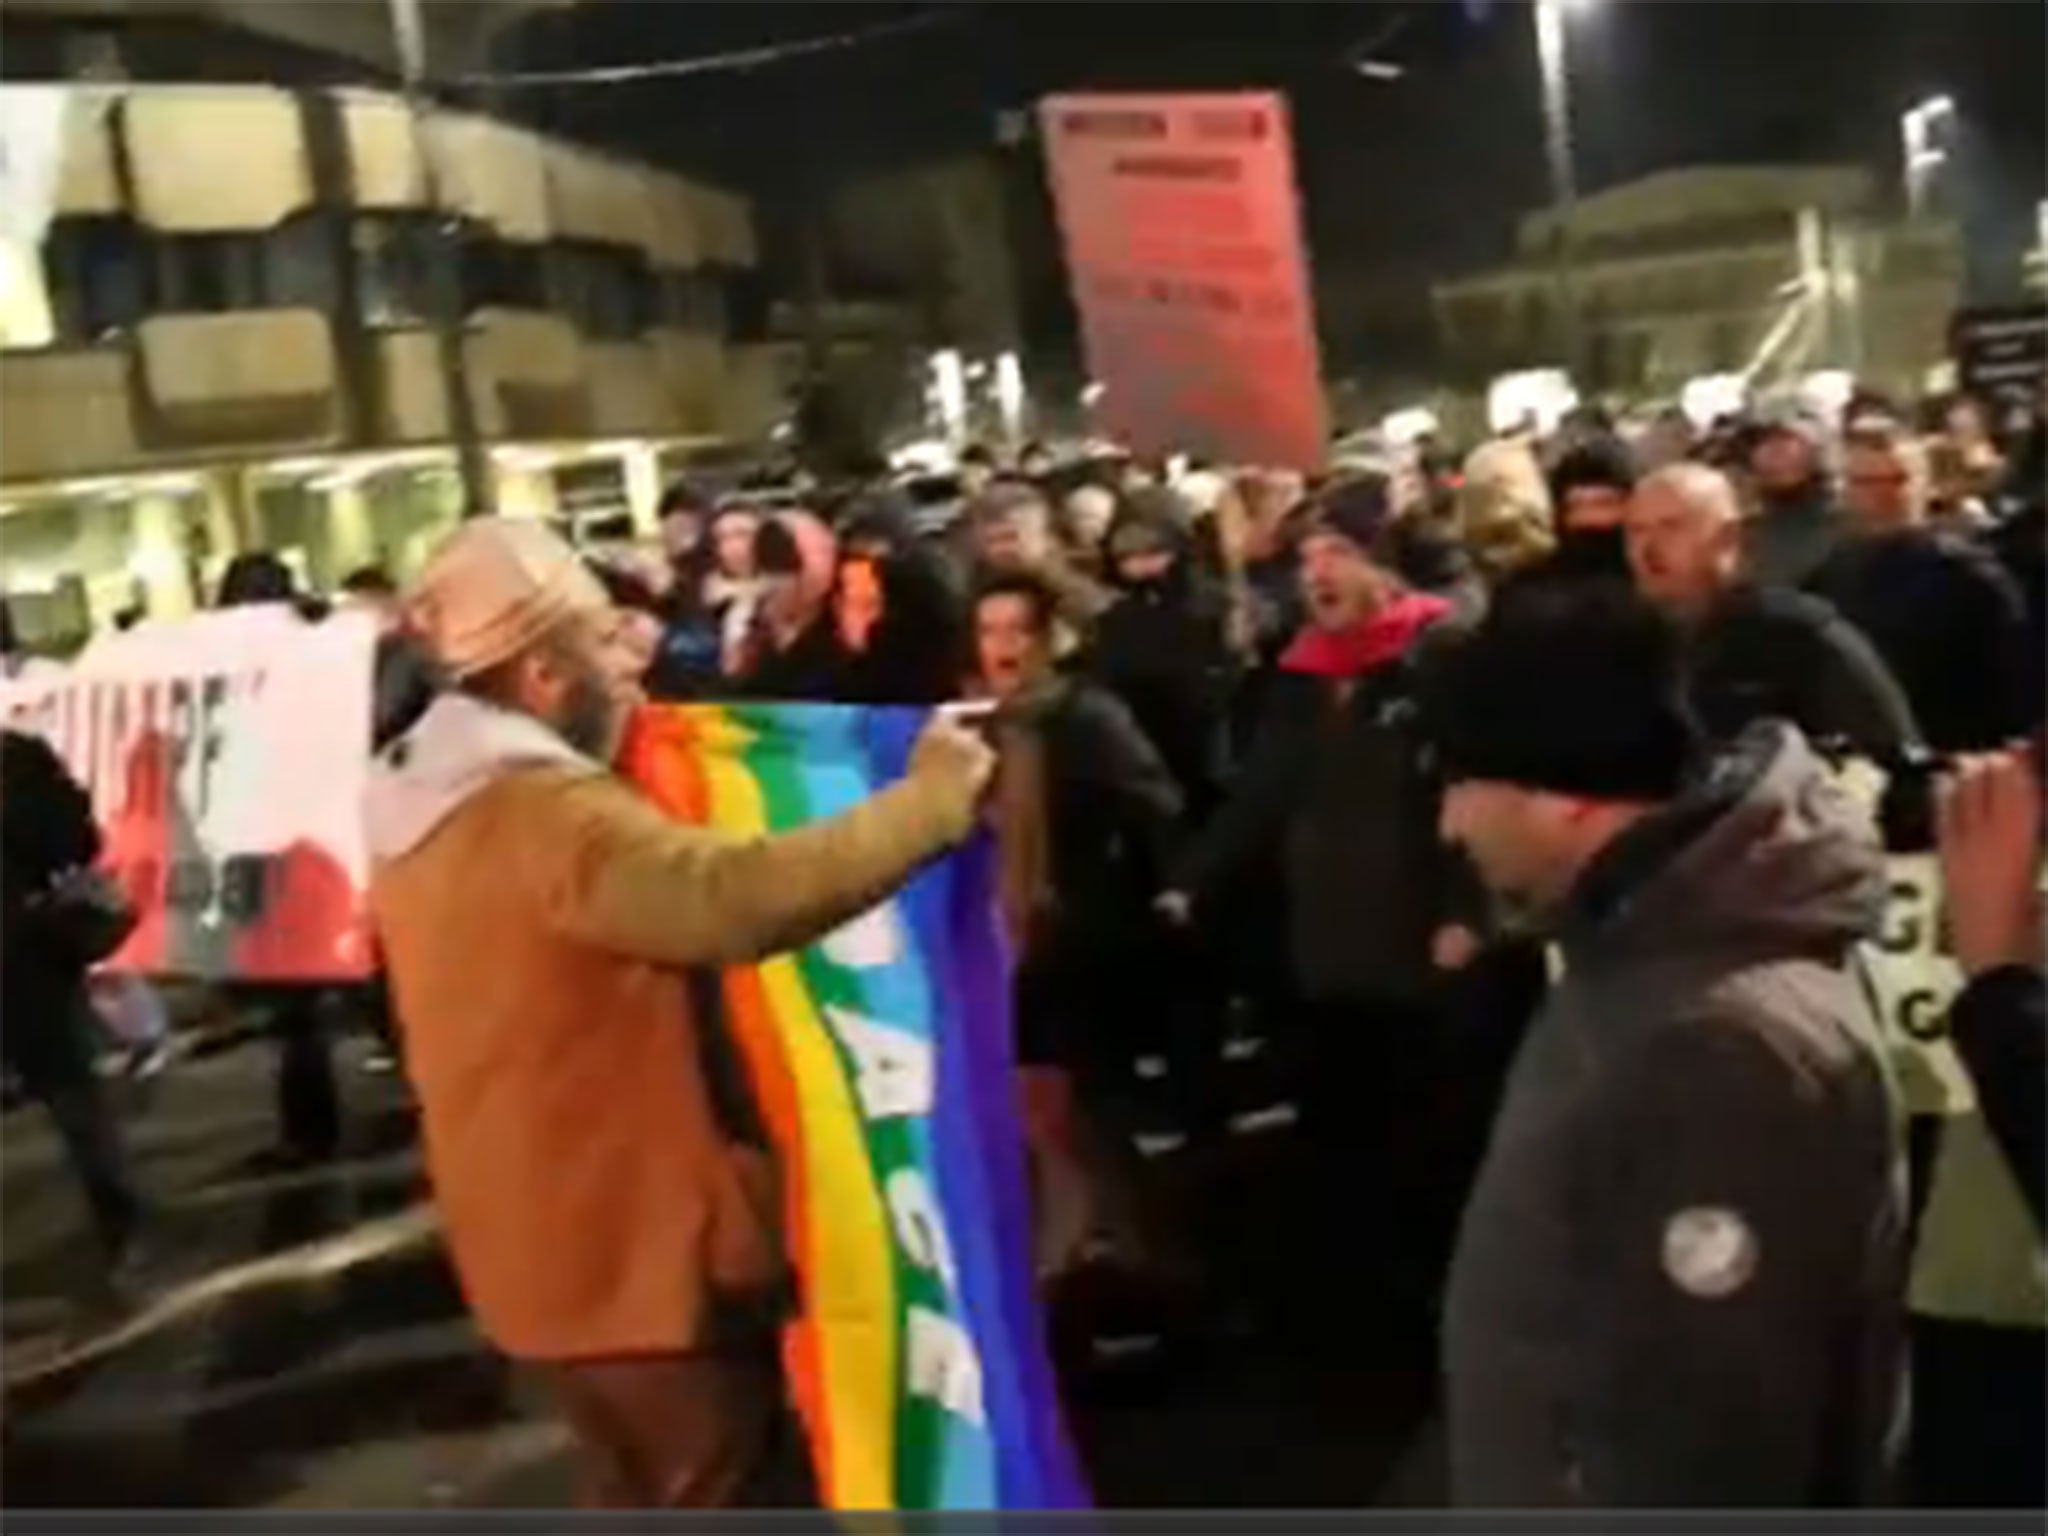 The man holding the flag in front of Legida protesters